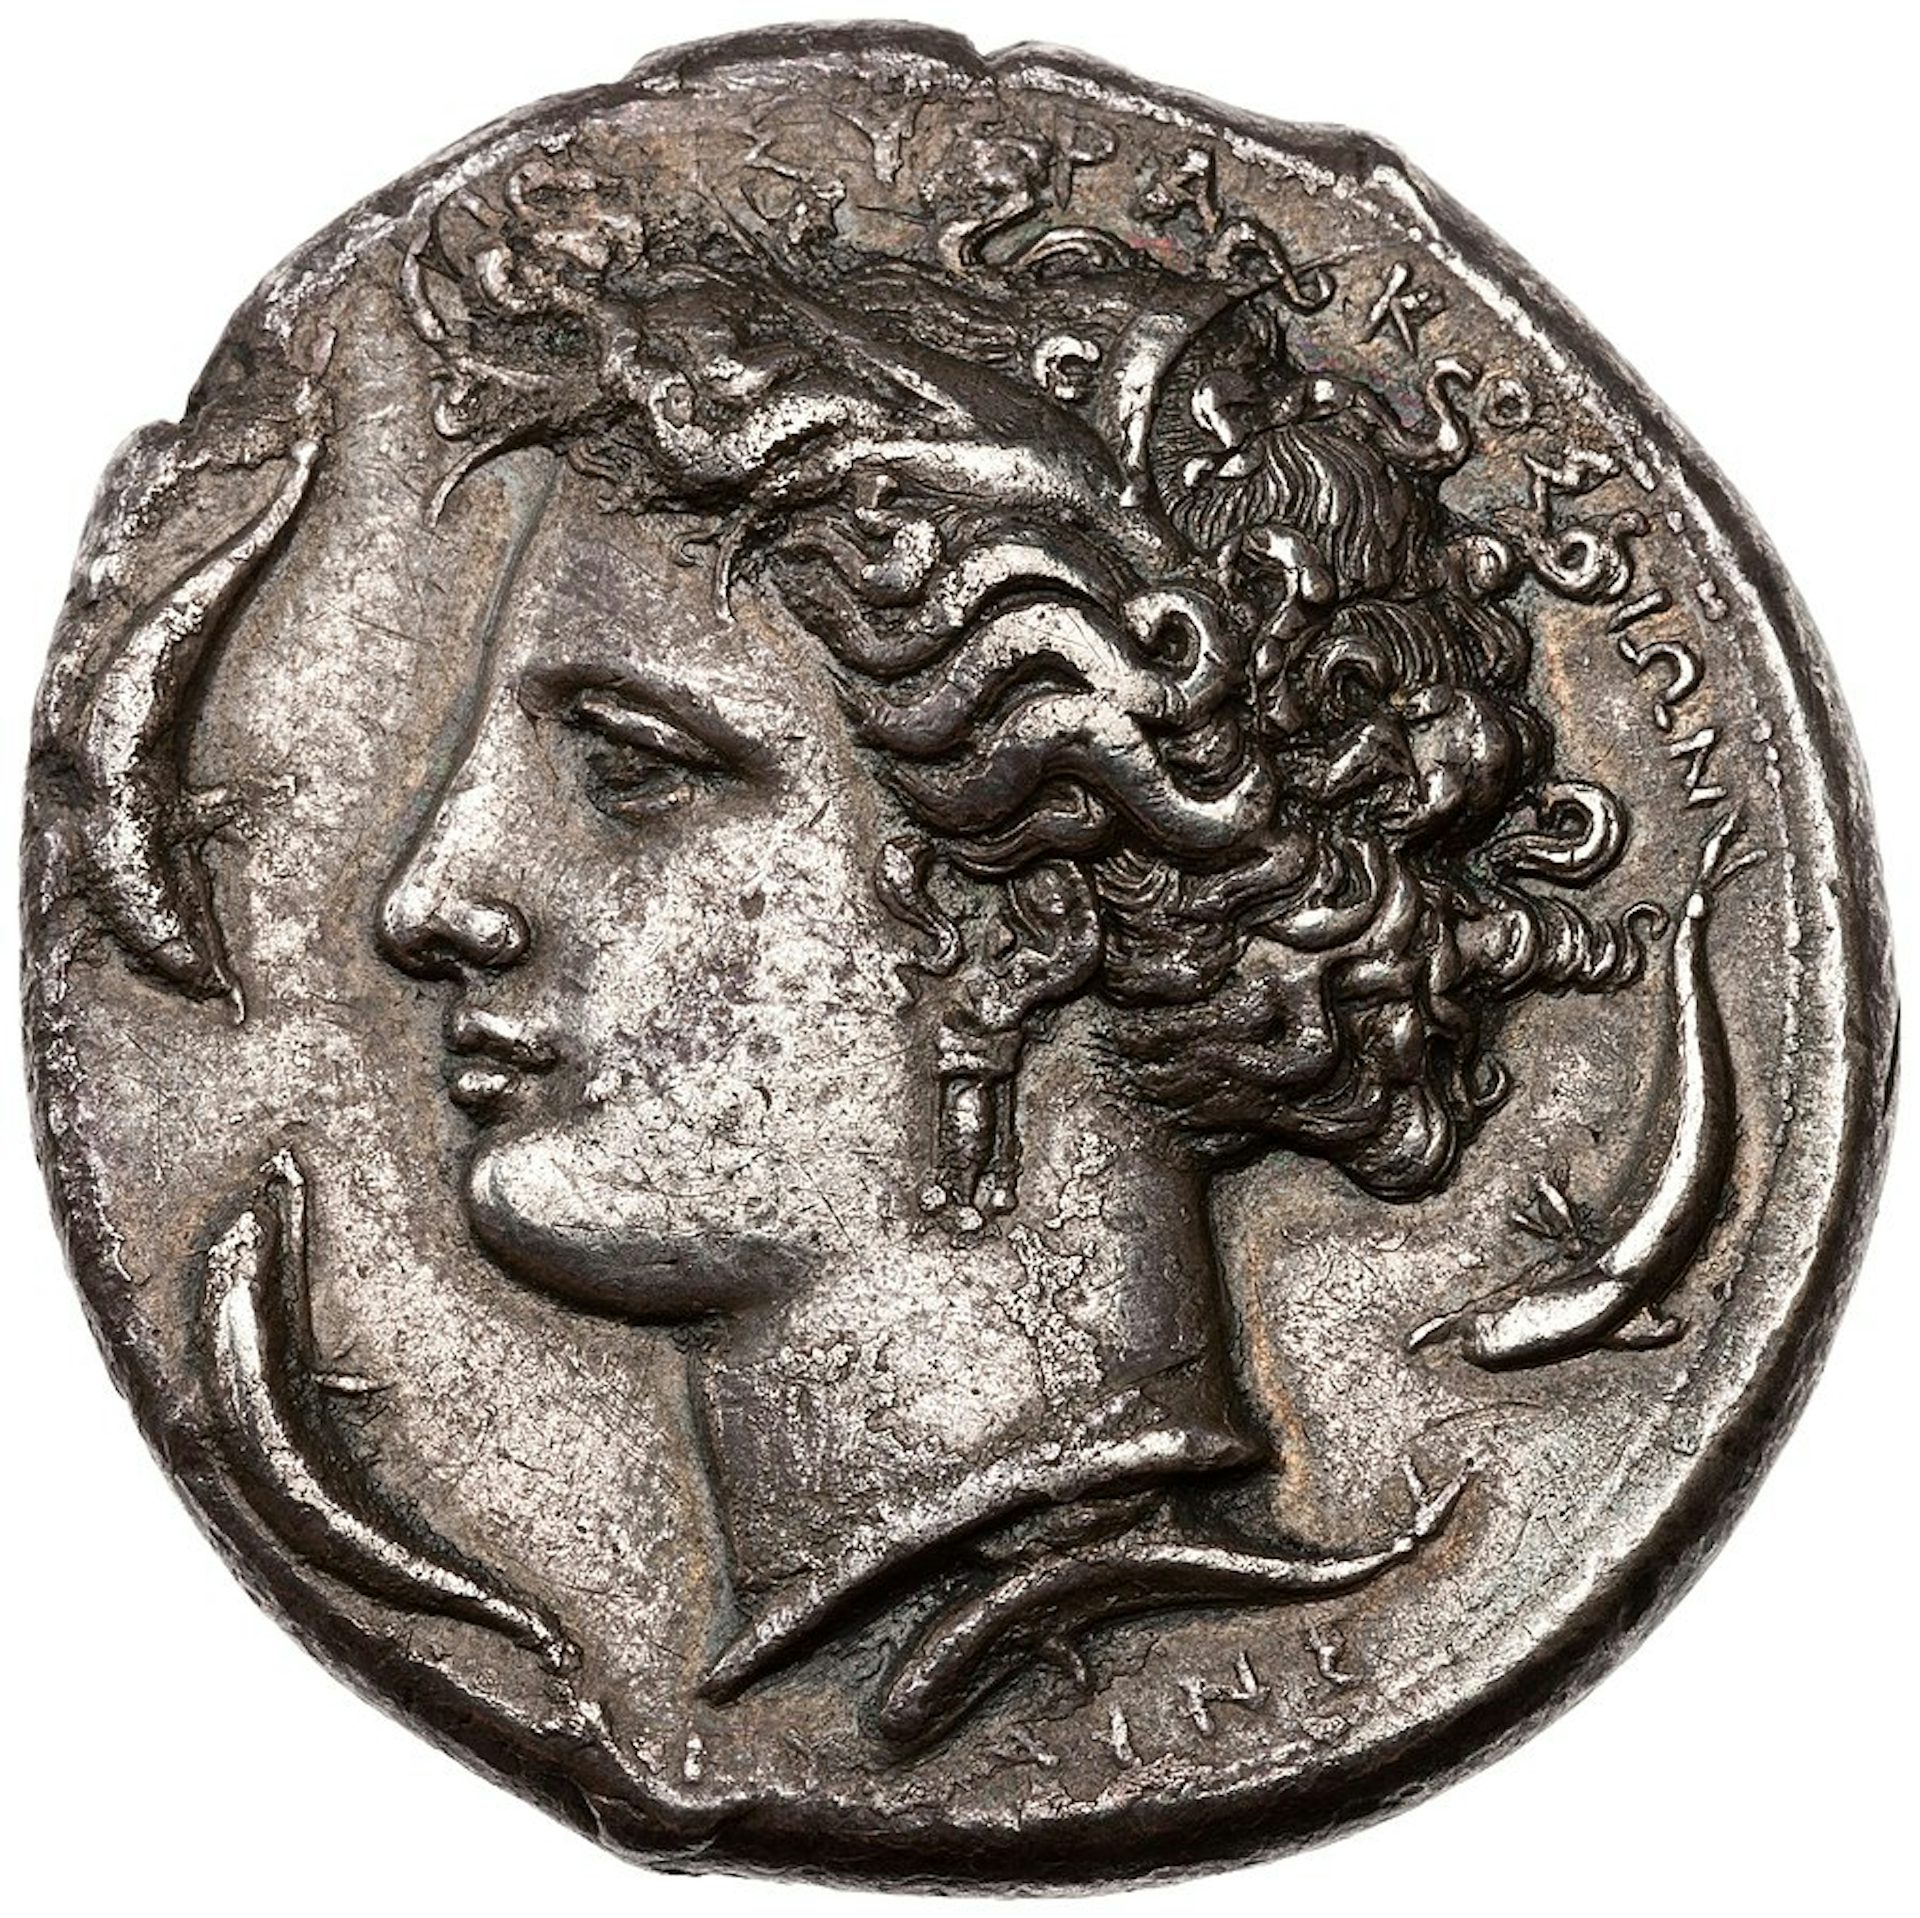 Silver decadrachm showing the head of Arethusa surrounded by leaping dolphins